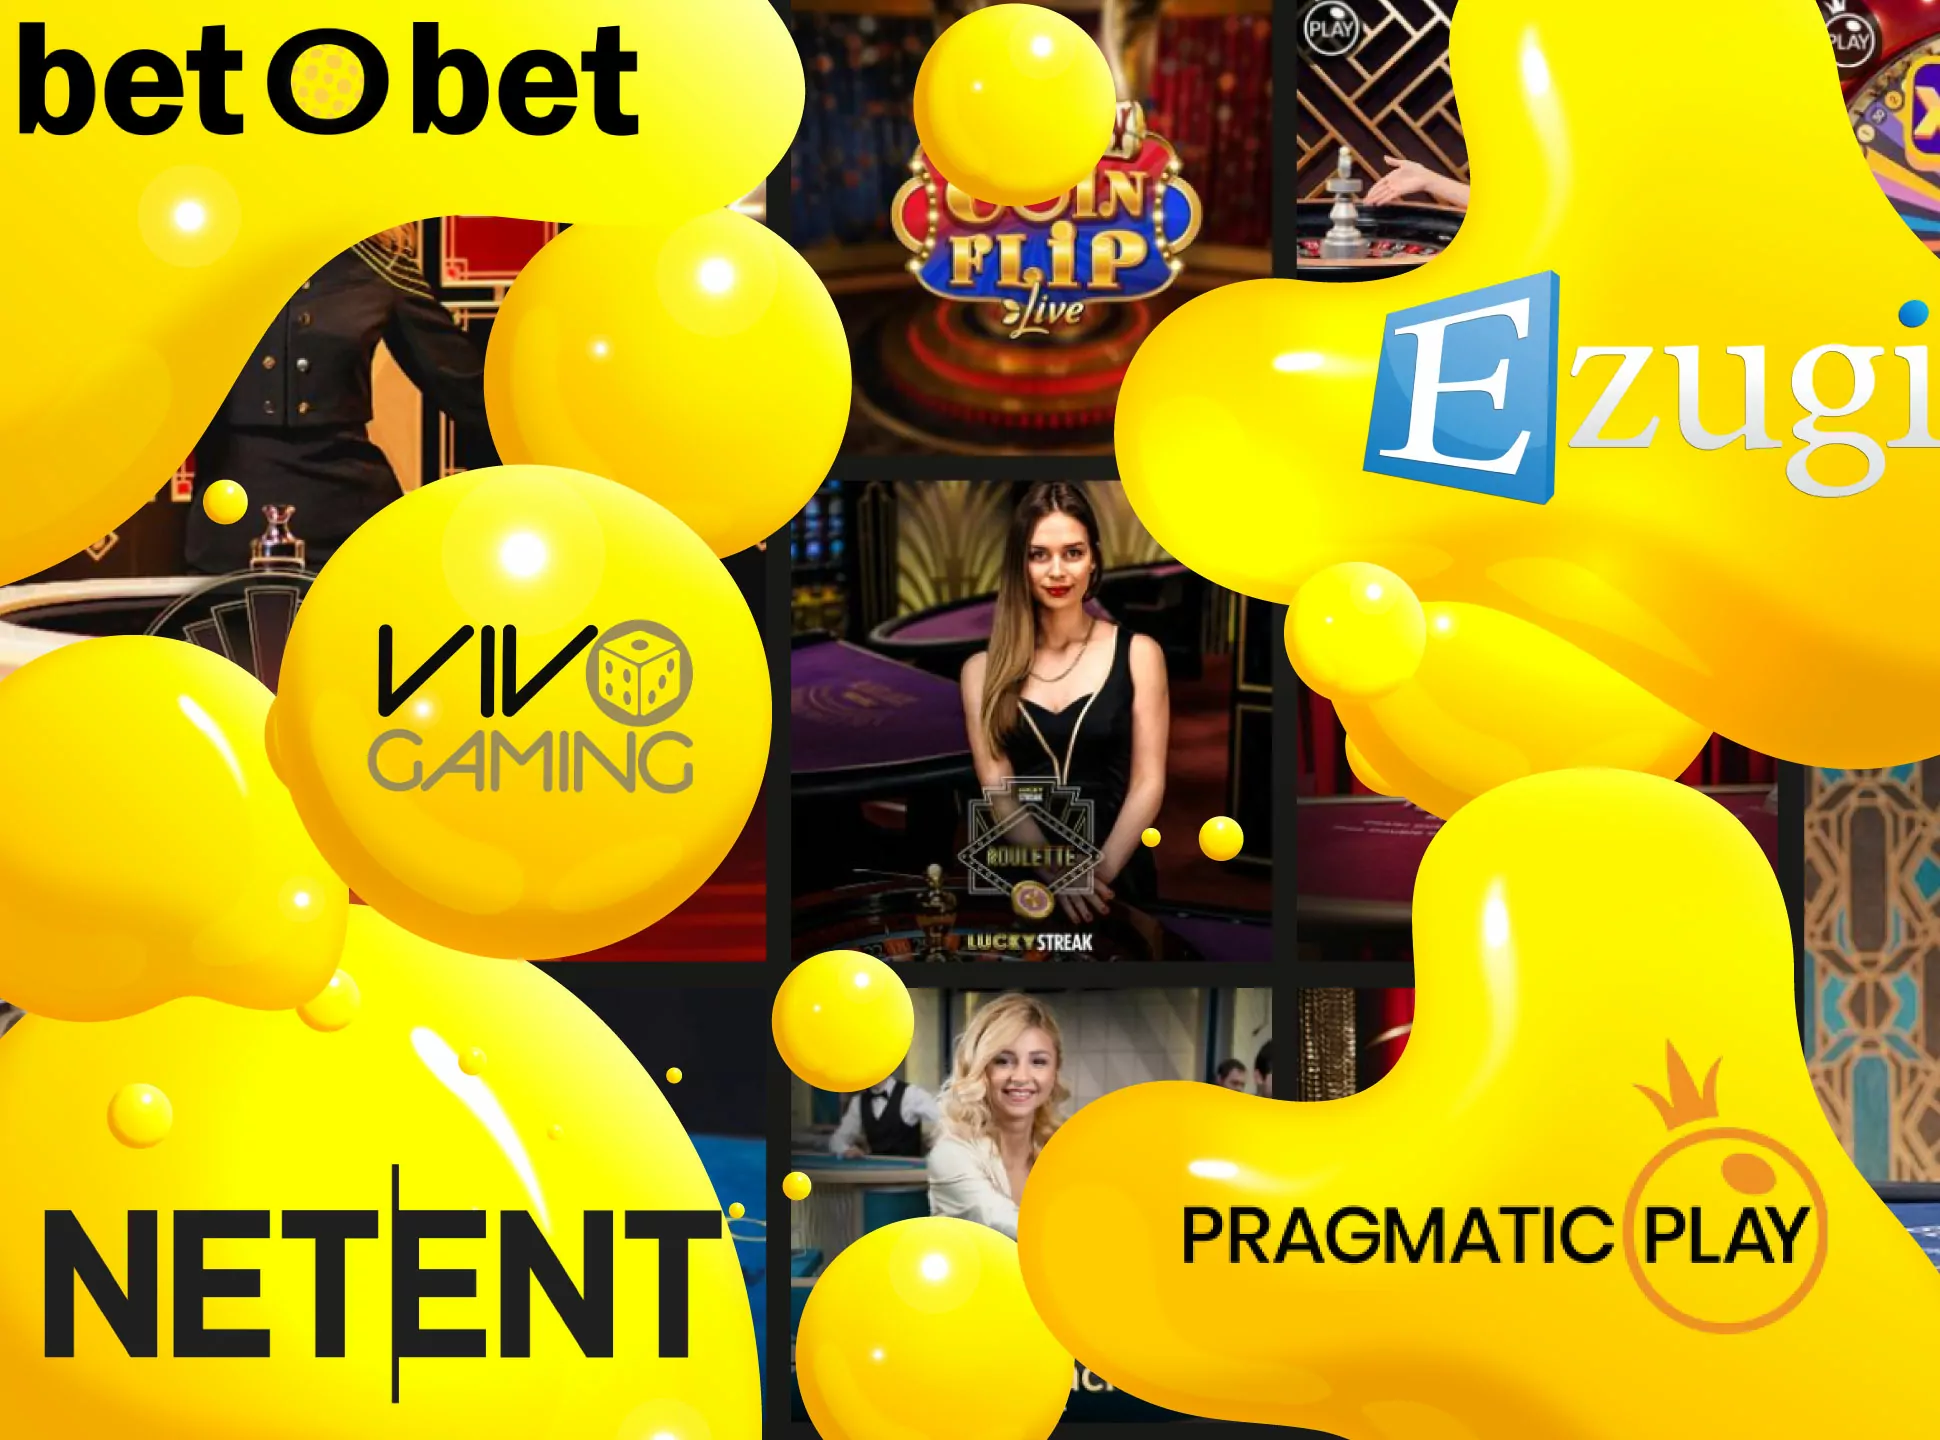 Betobet has a lot of various casino games from well-known games providers.